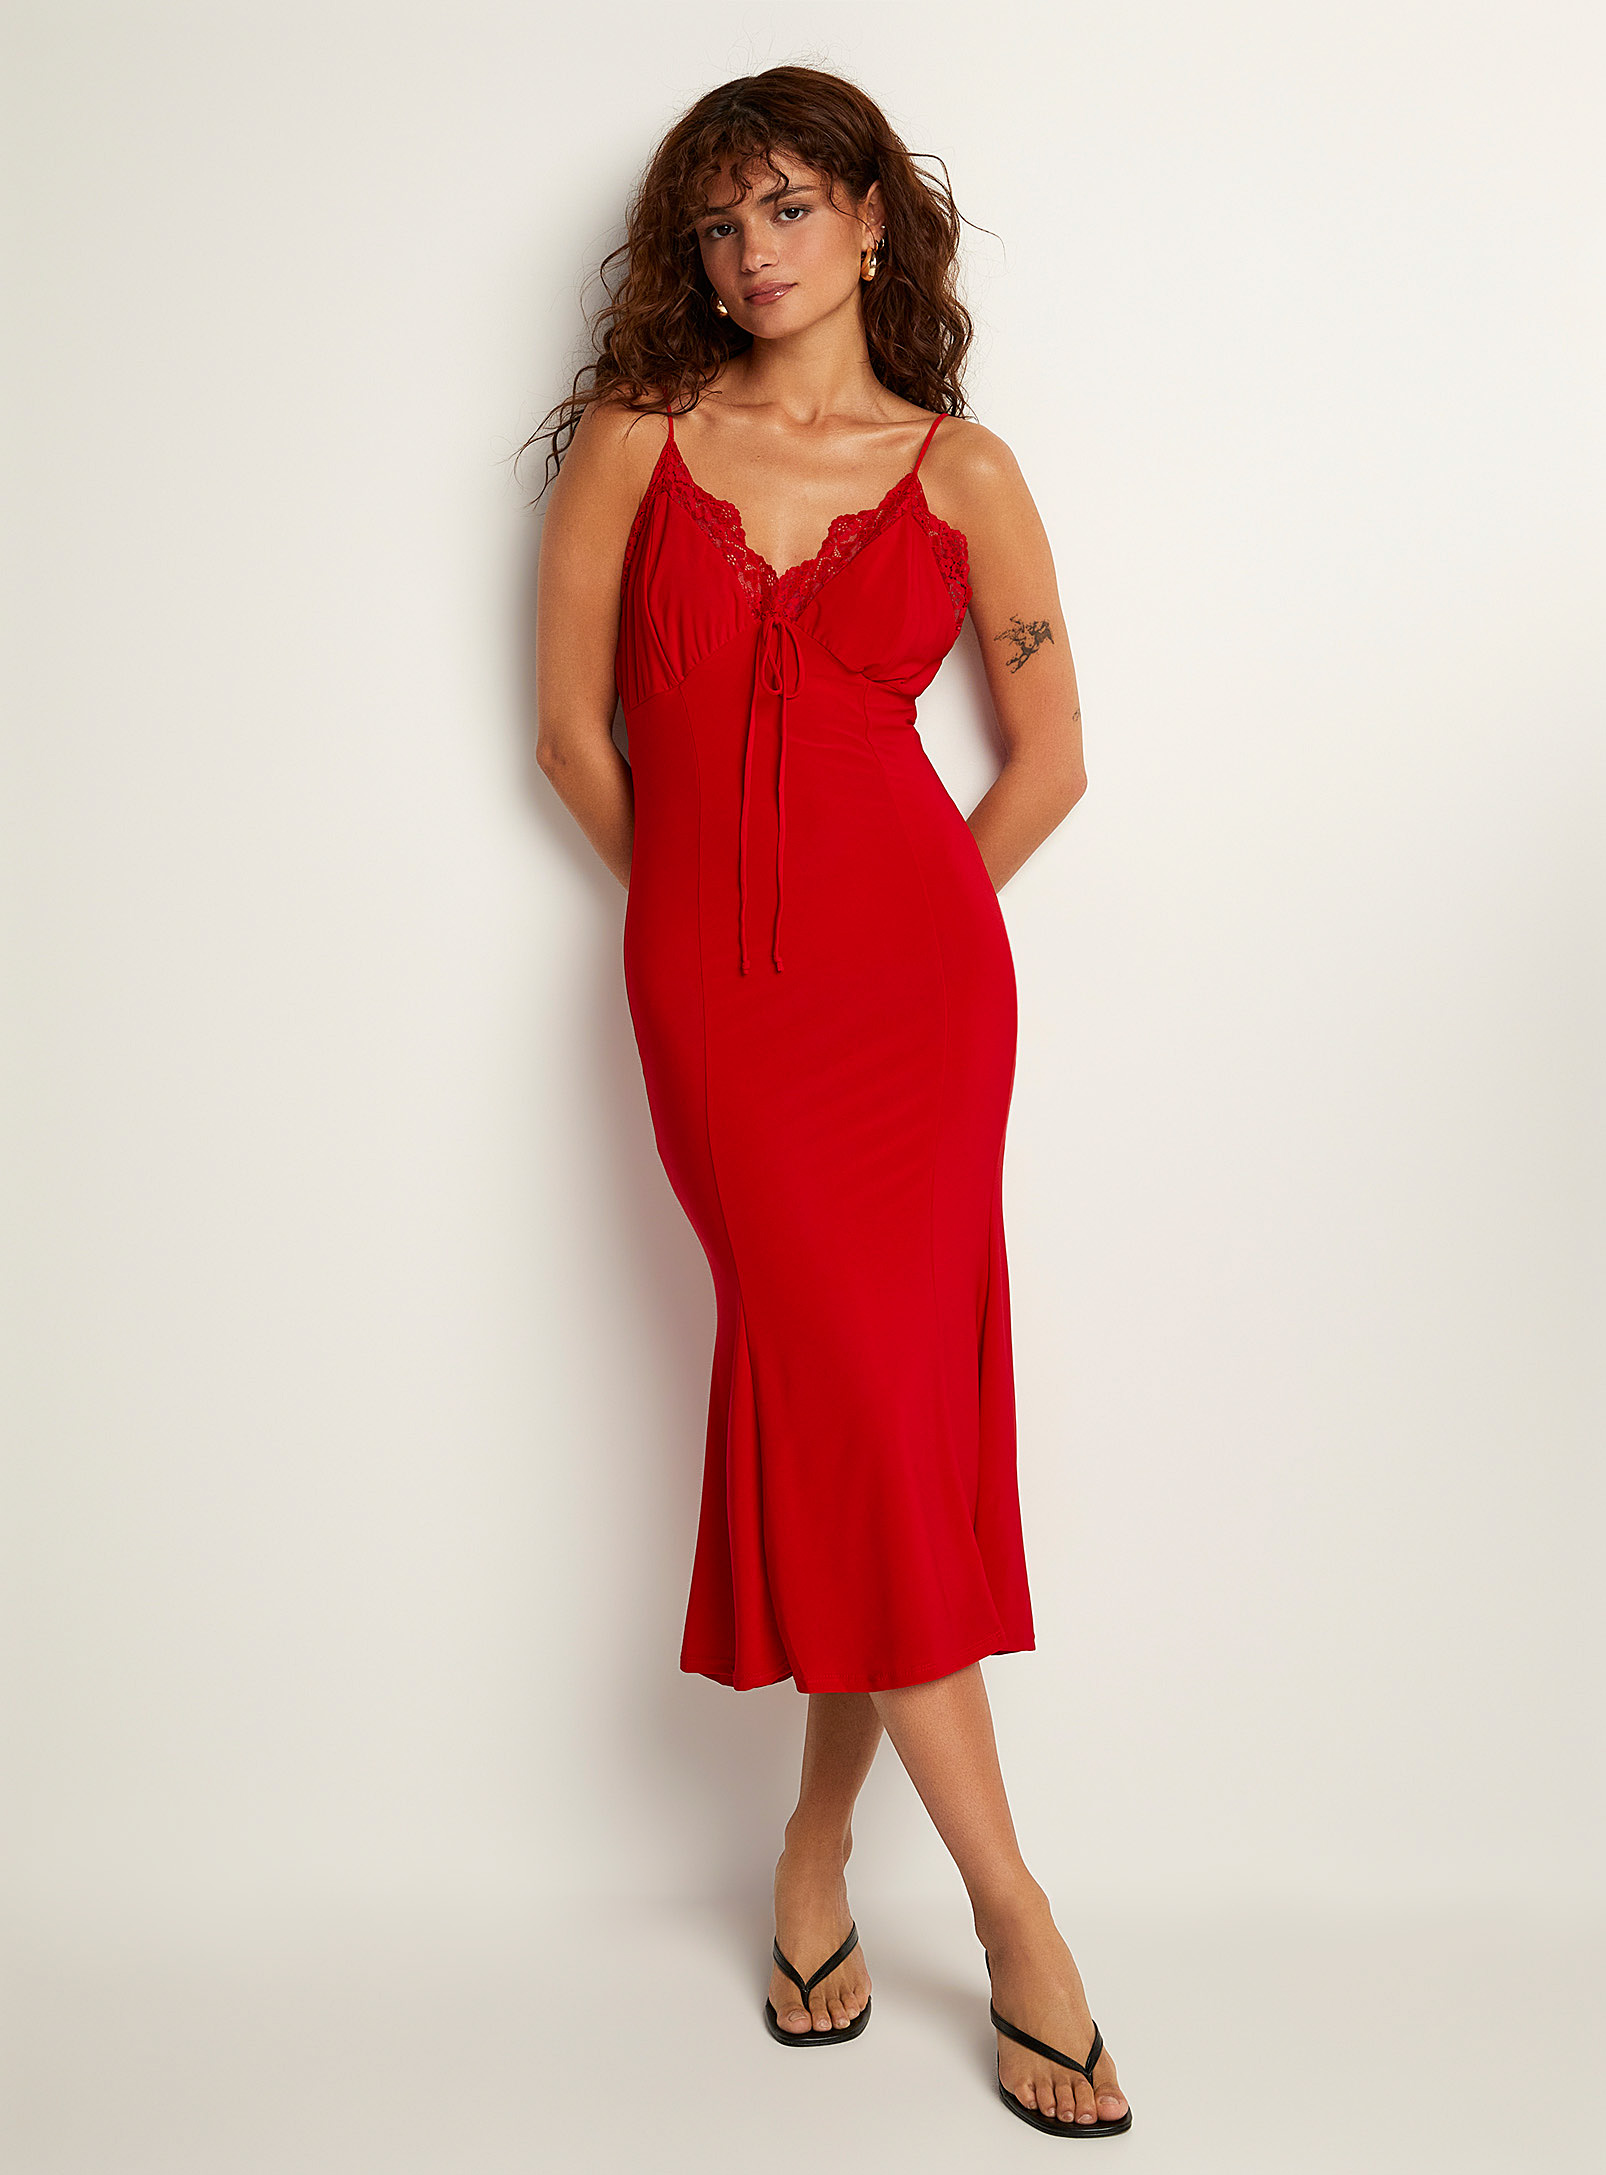 Icone Lace Edging Passion Red Dress